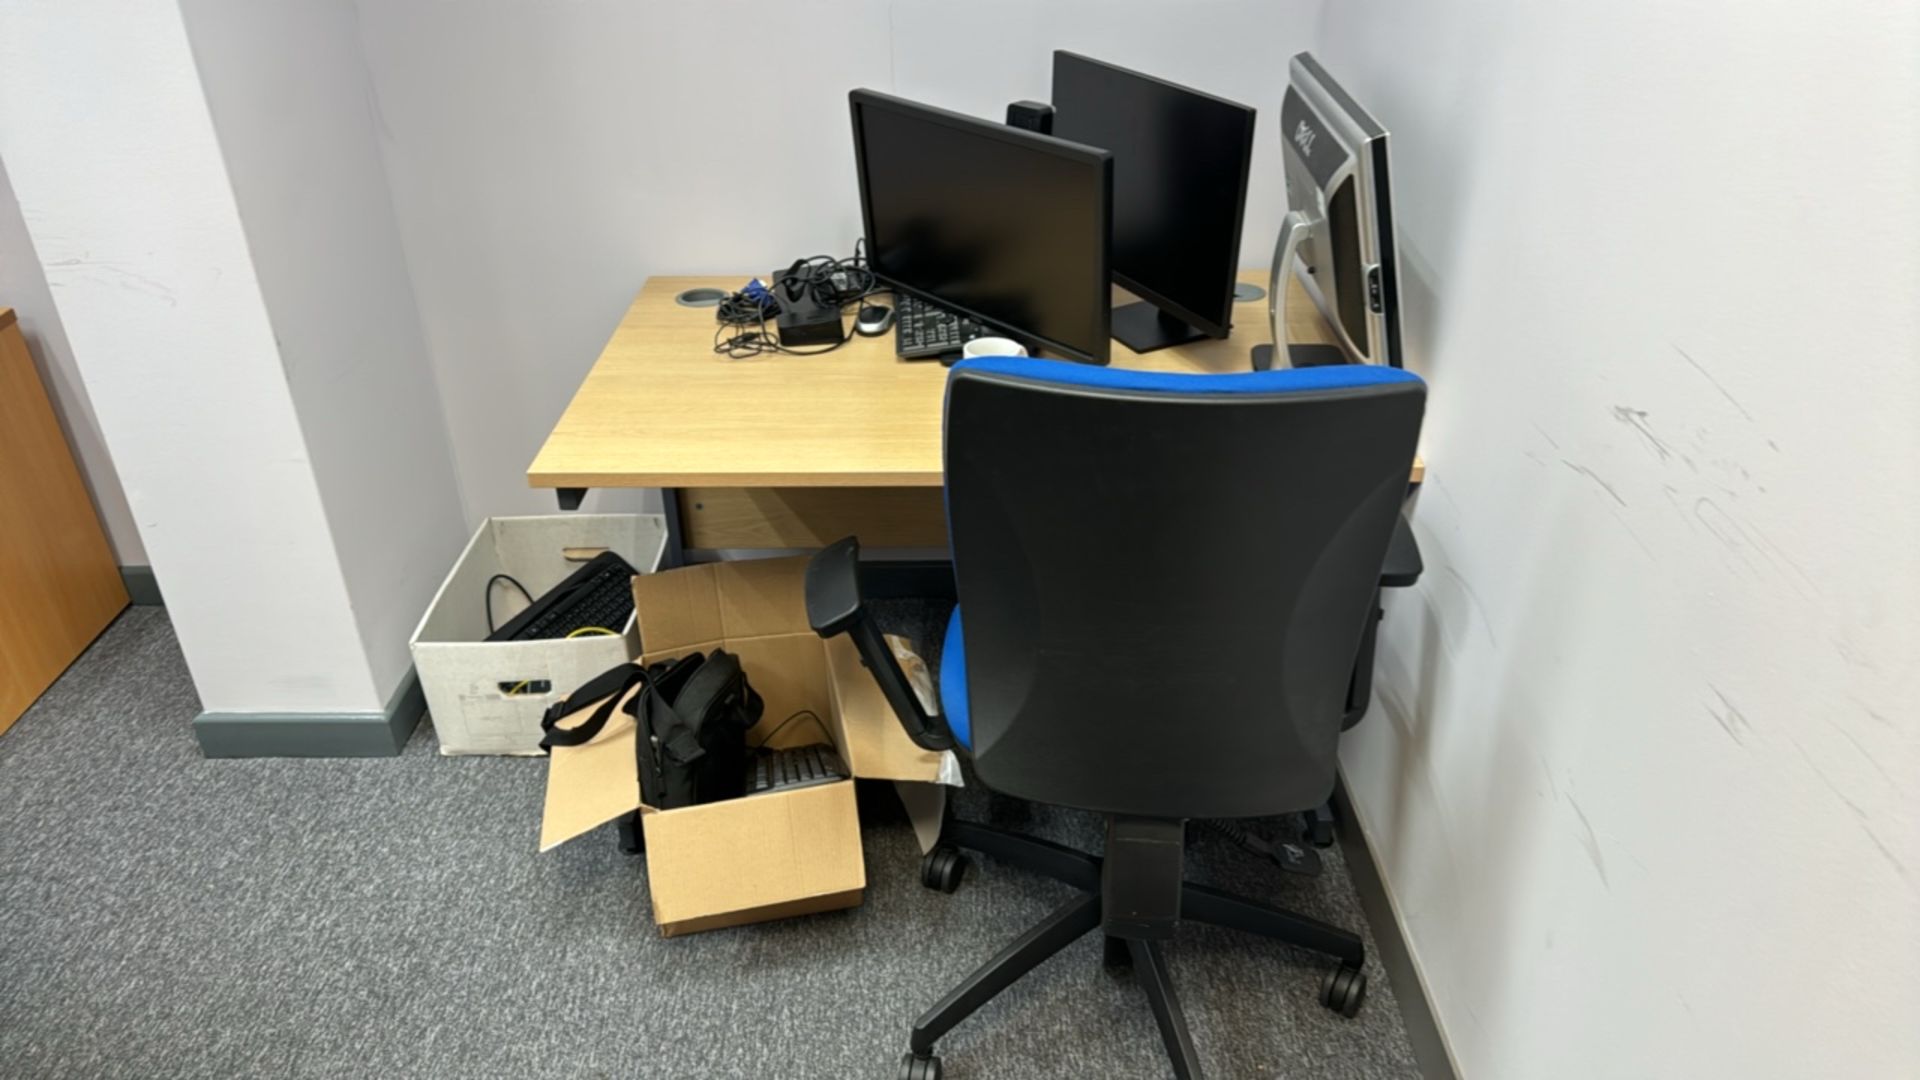 ref 240 - Office Contents - Image 3 of 6